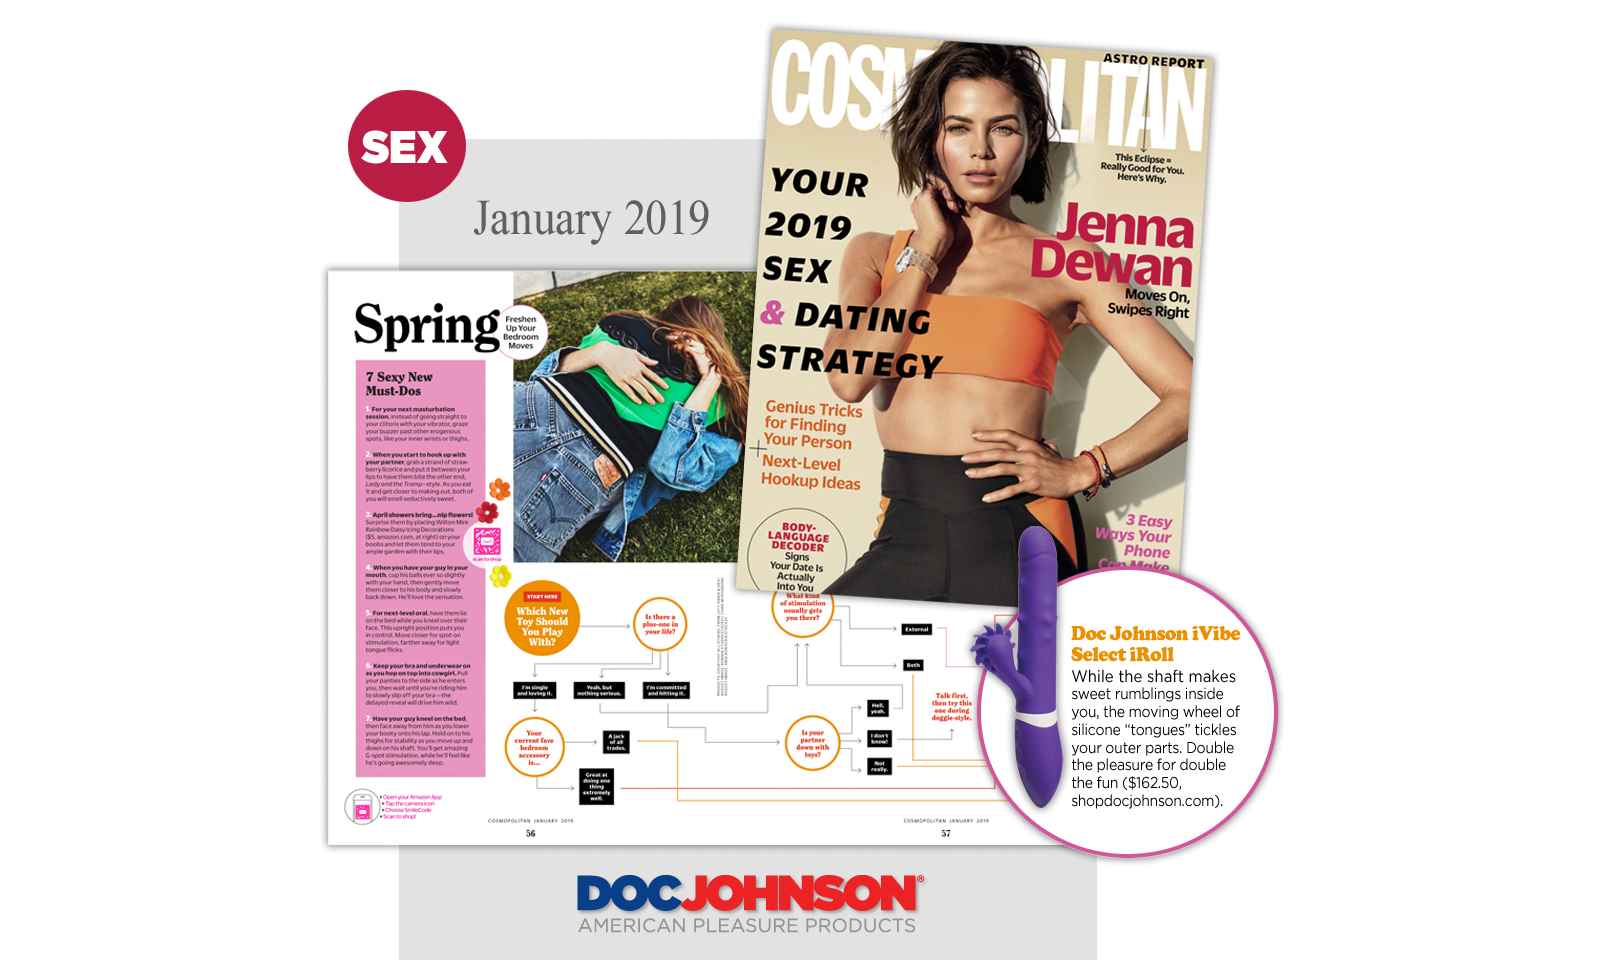 Cosmopolitan Features Doc Johnson’s iRoll in January 2019 Issue